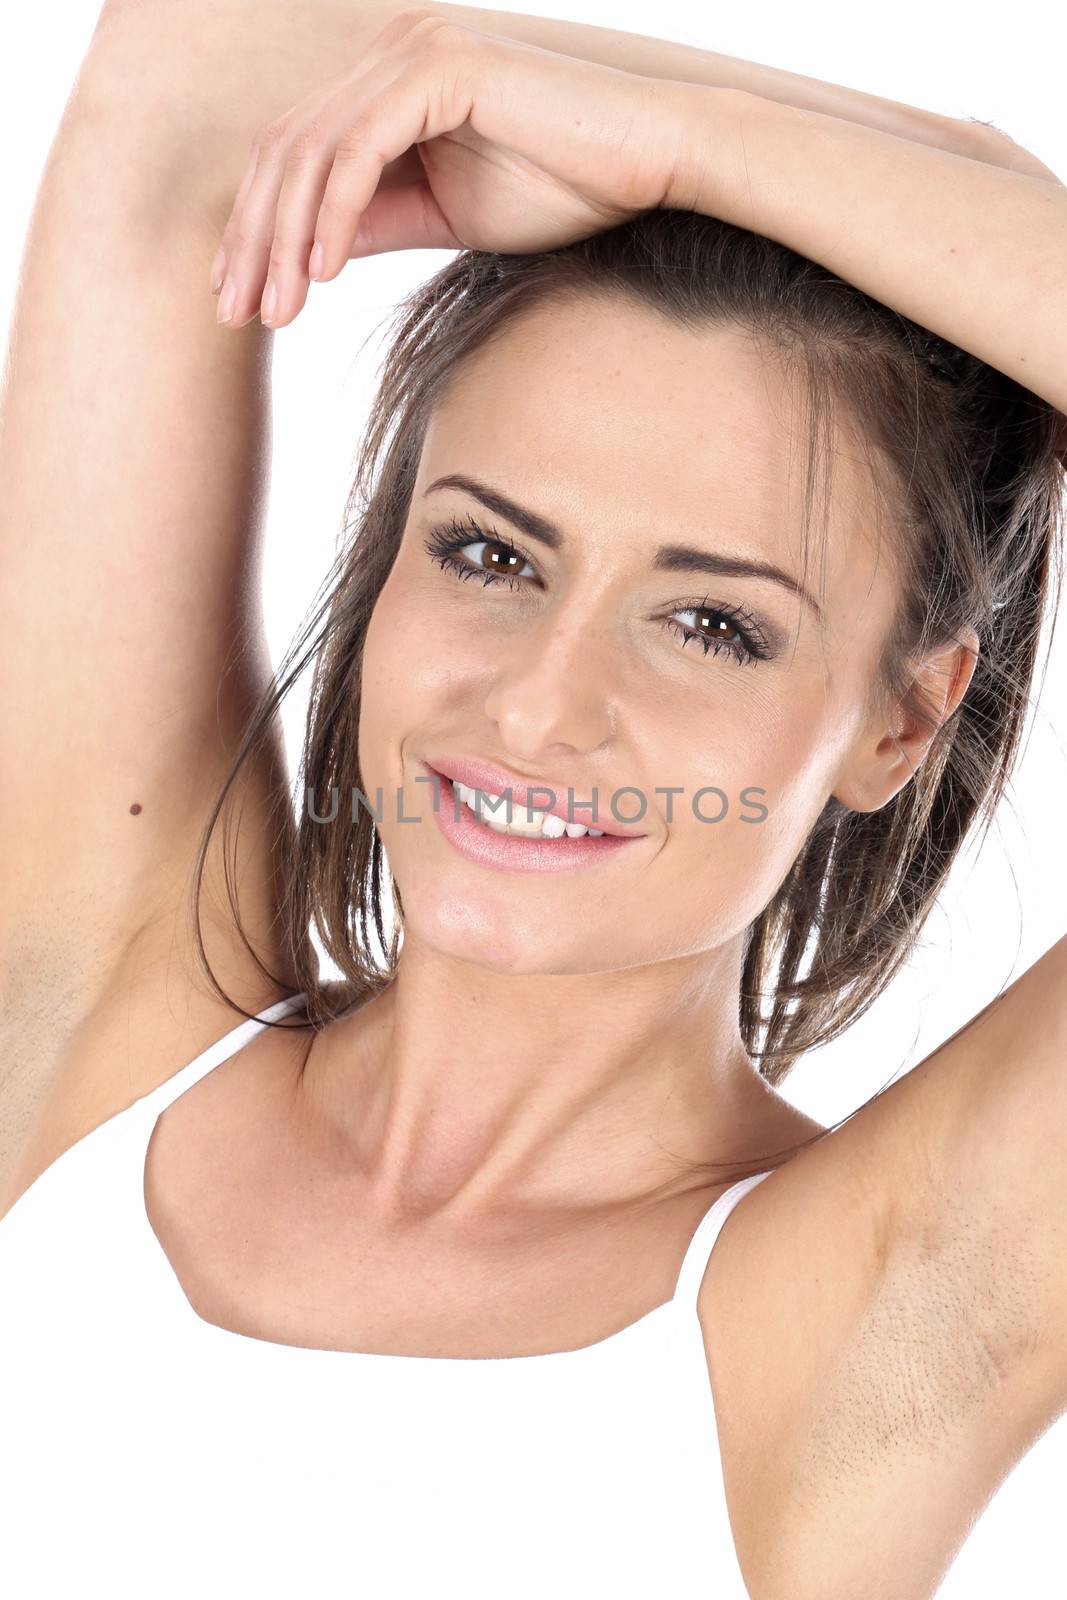 Model Released. Happy Young Woman Portrait by Whiteboxmedia